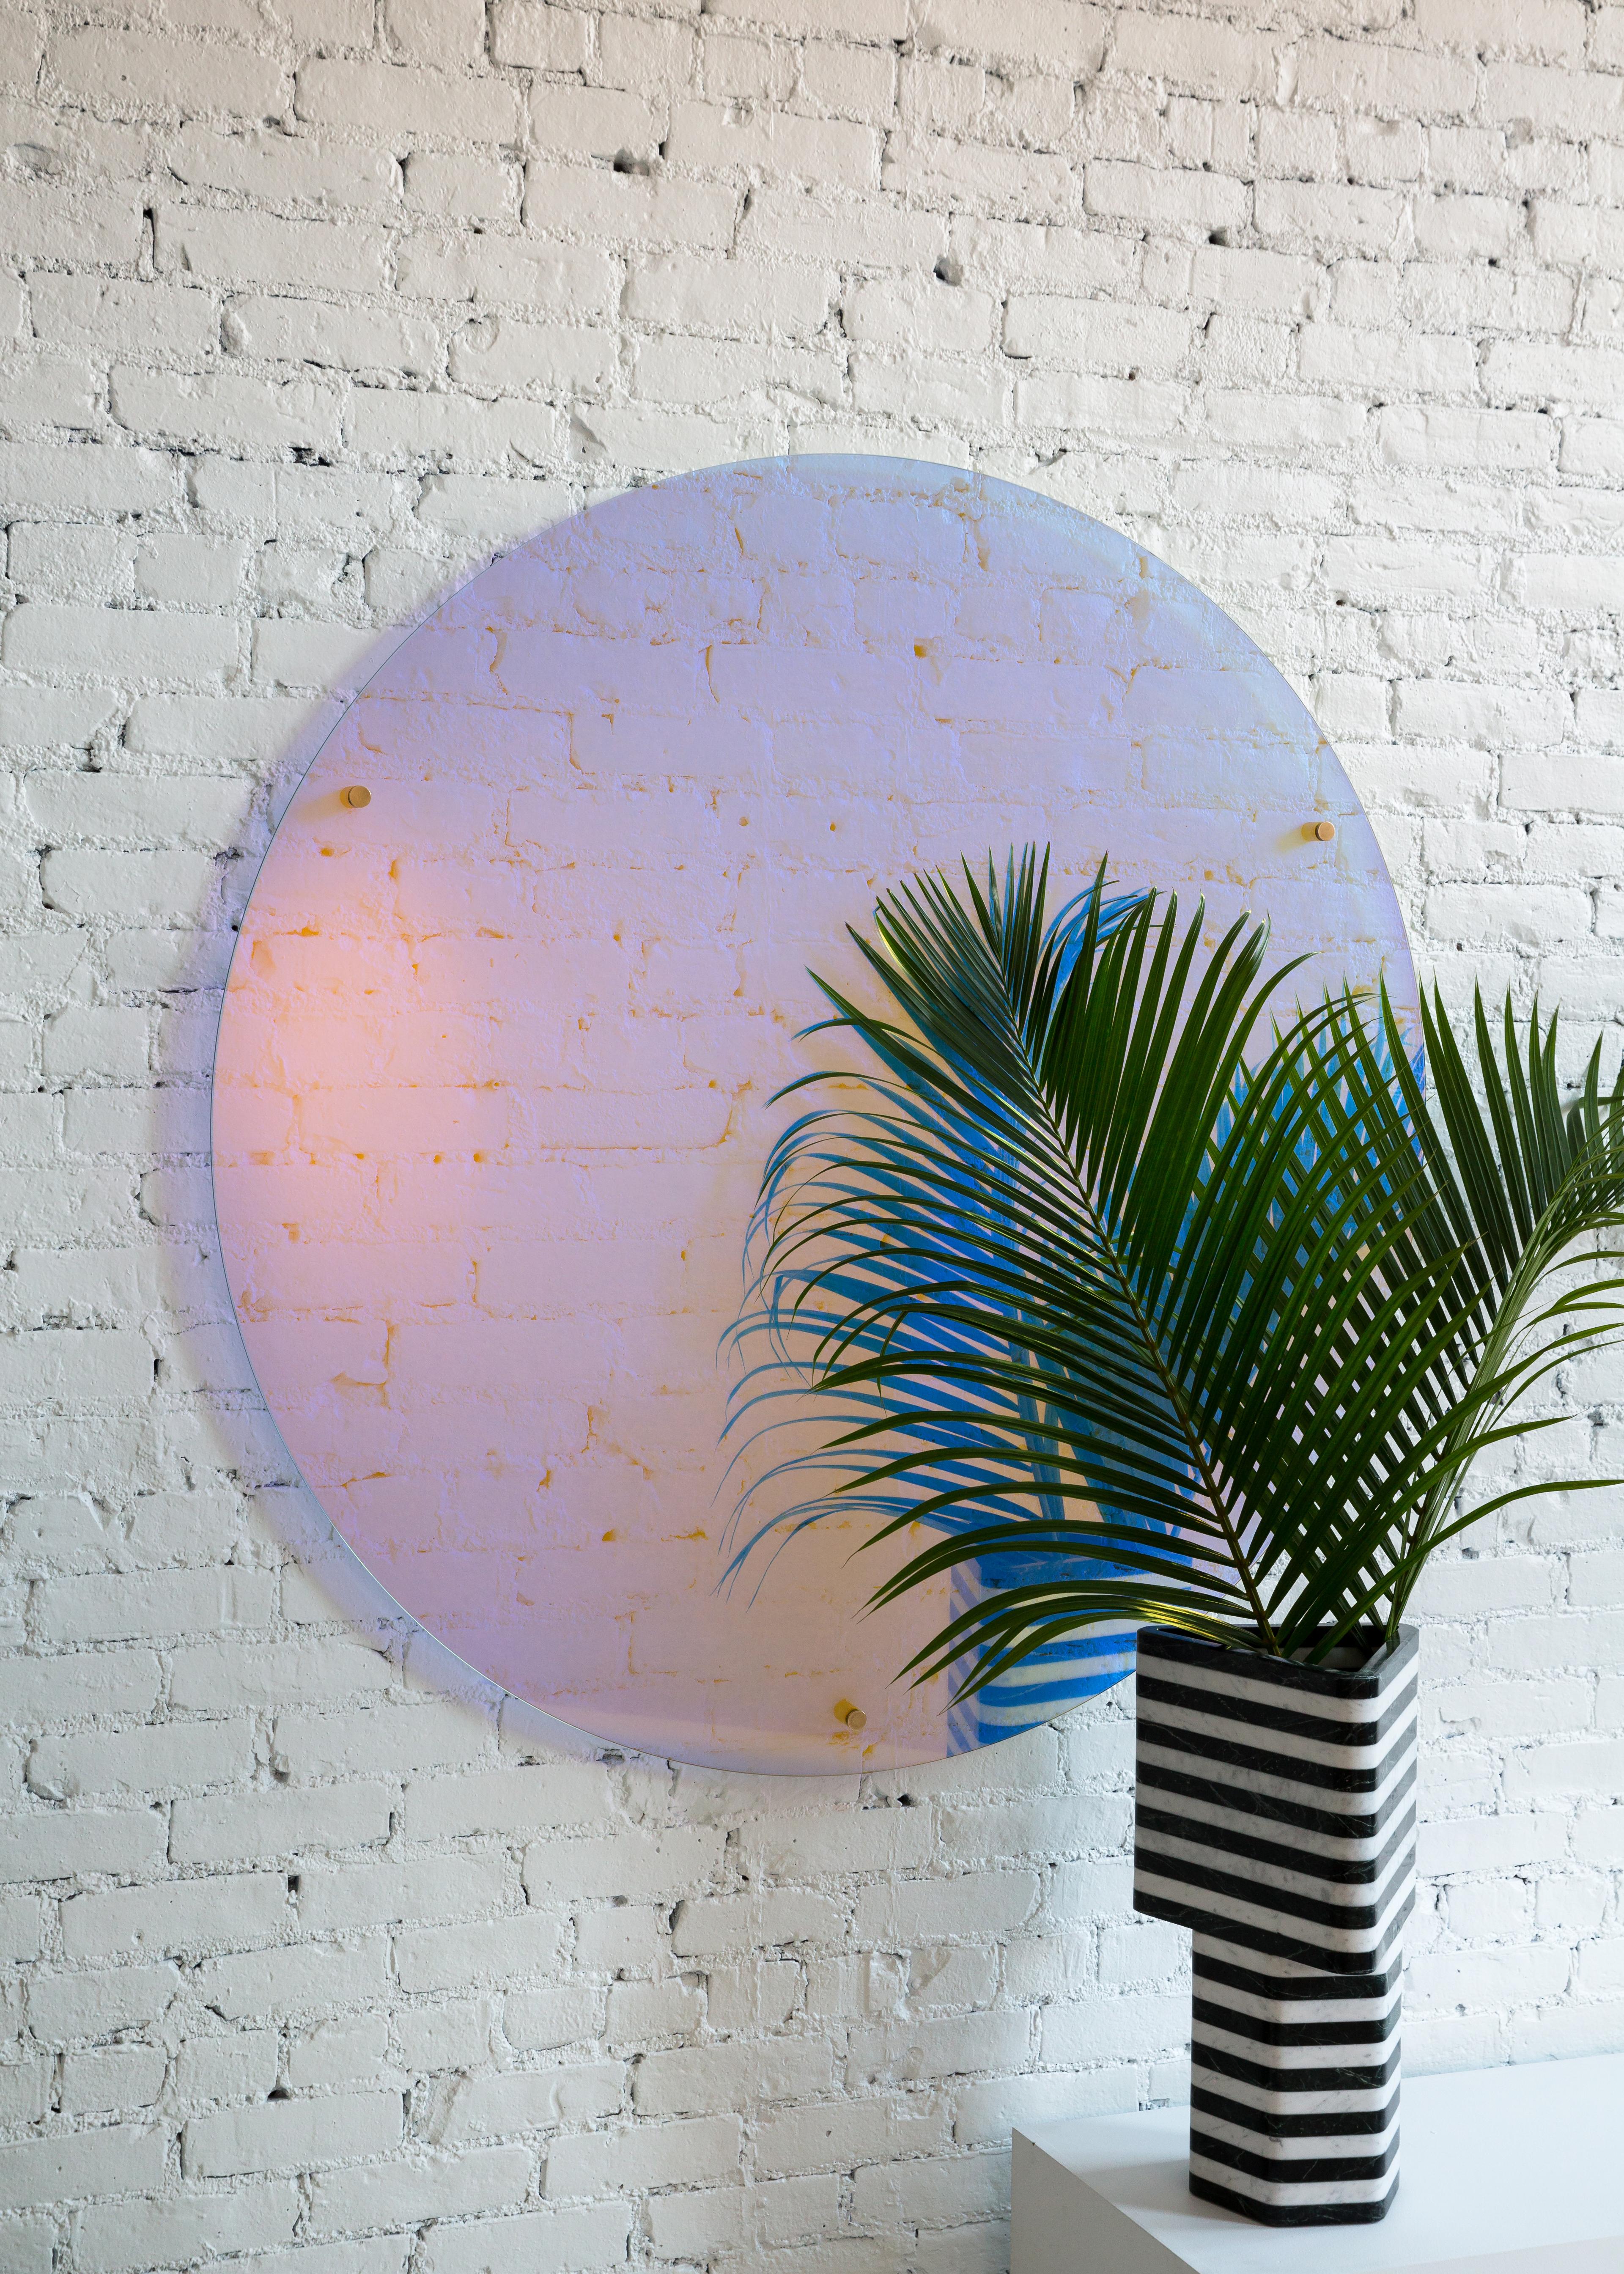 This unique wall-mounted piece is as much a statement art piece as it is a mirror. Made of the highest quality dichroic glass the color shifts when viewing from different angles and throughout the day as changes in natural light intensity and color